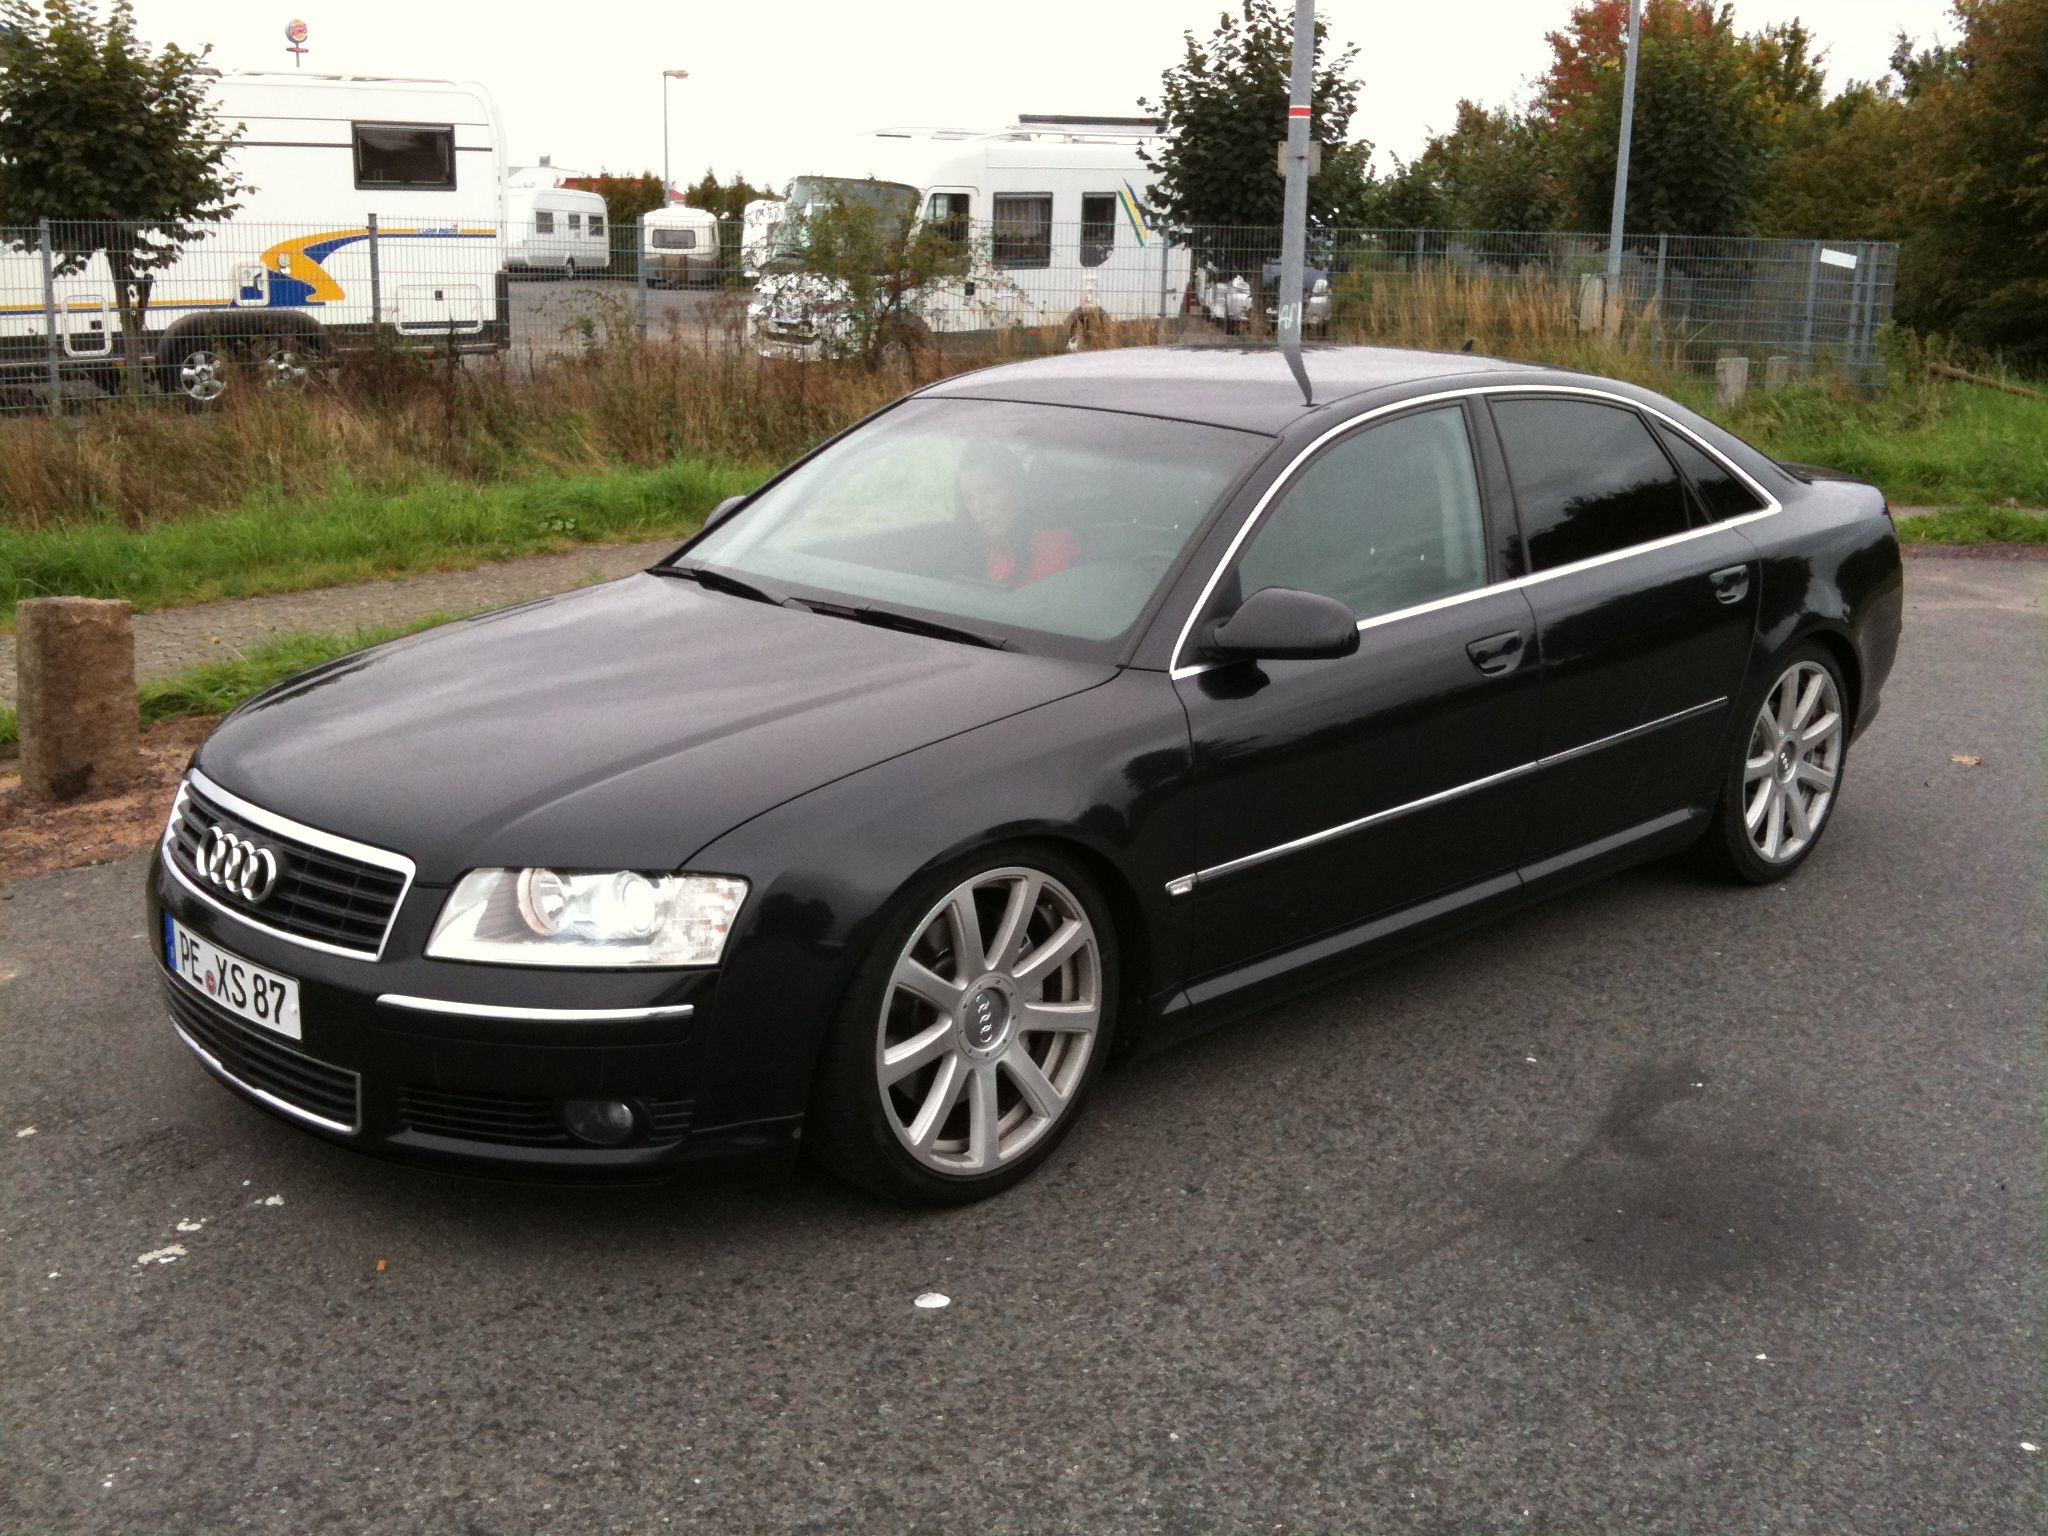 coltharpfamilygoldenyears: 19 Awesome Audi Car A4